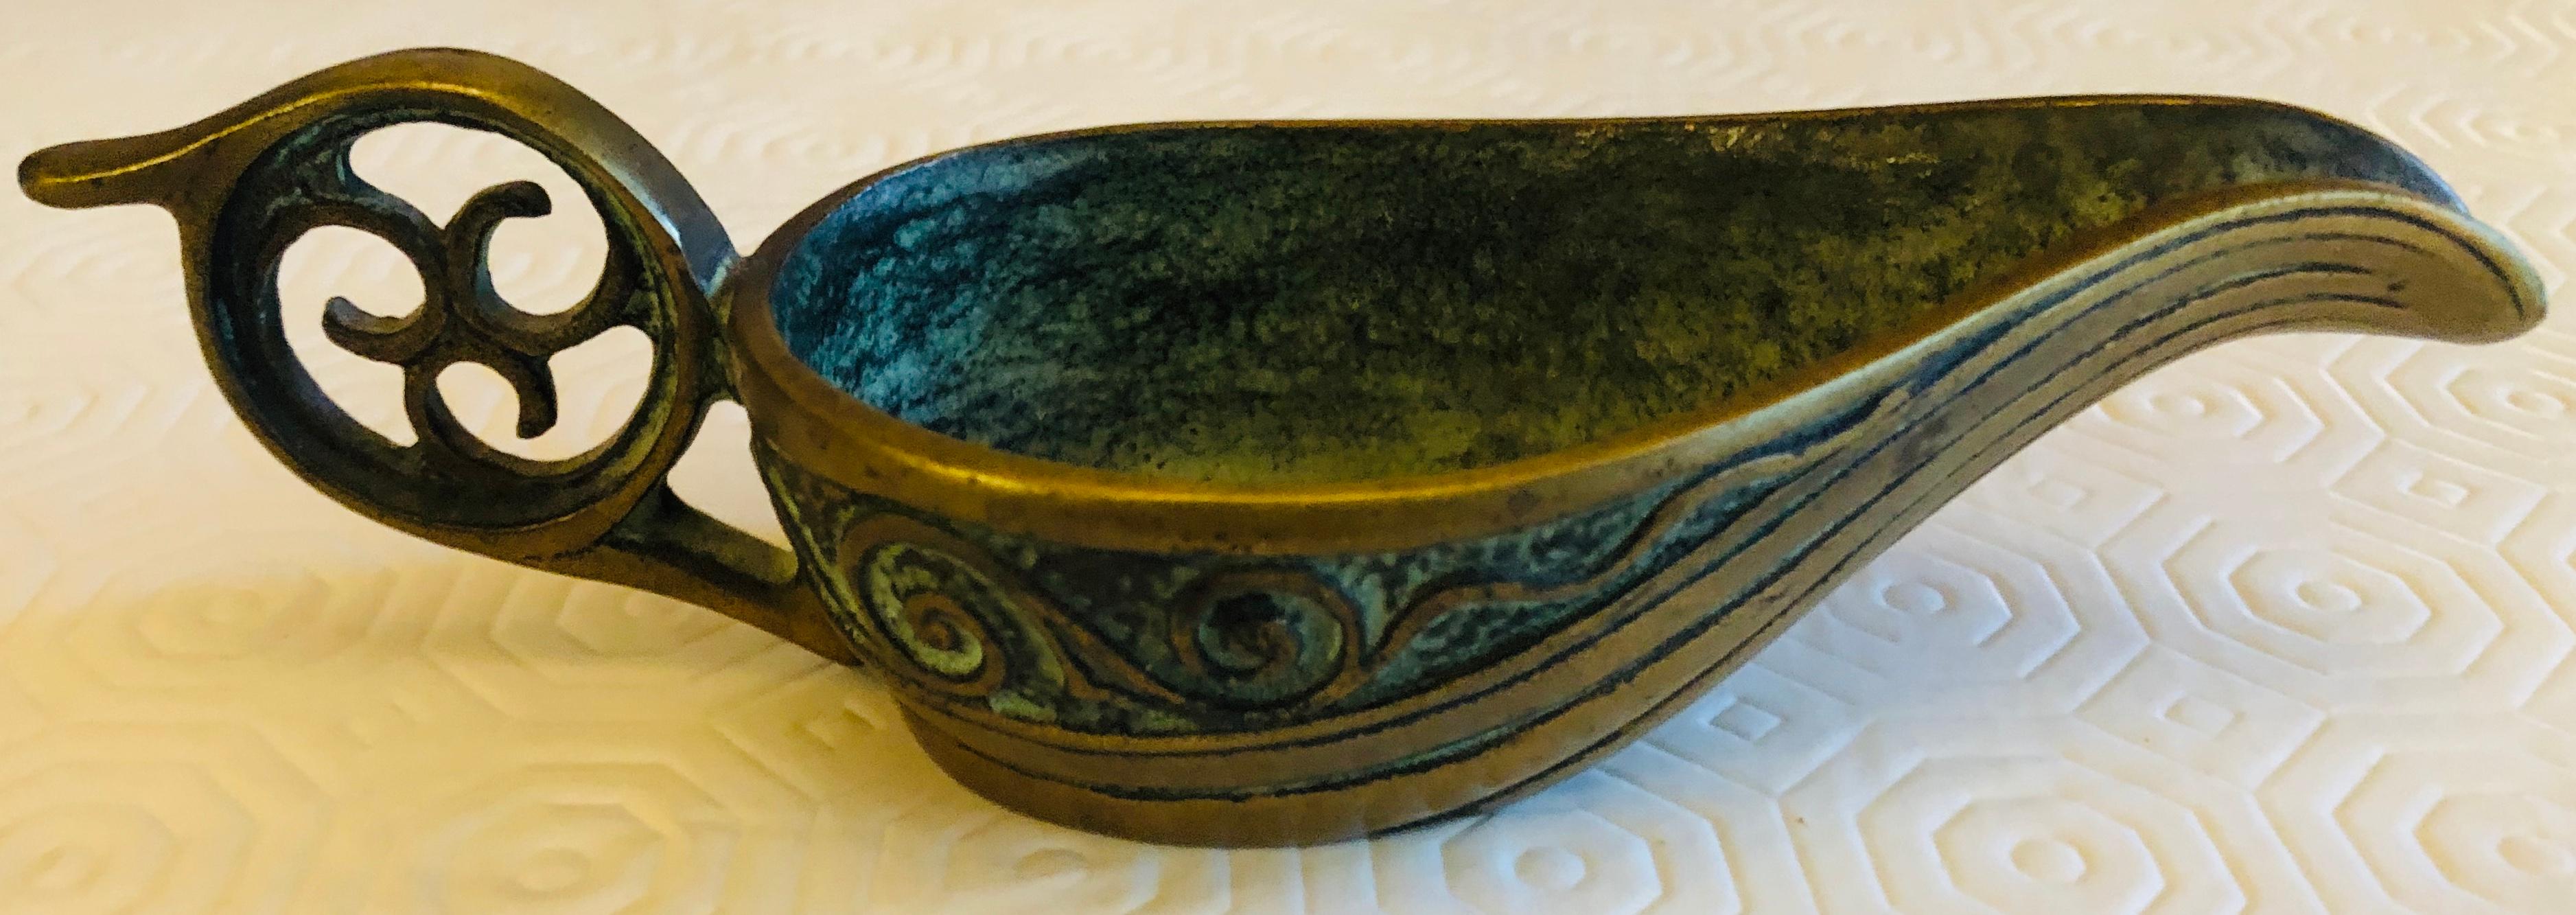 Stunning bronze Art Deco key bowl or vide poche signed Max Le Verrier, France, circa 1930. Remarkable craftsmanship typical of this makers quality pieces. 

This Max Le Verrier bronze makes a wonderful key bowl or desk accessory. It is an